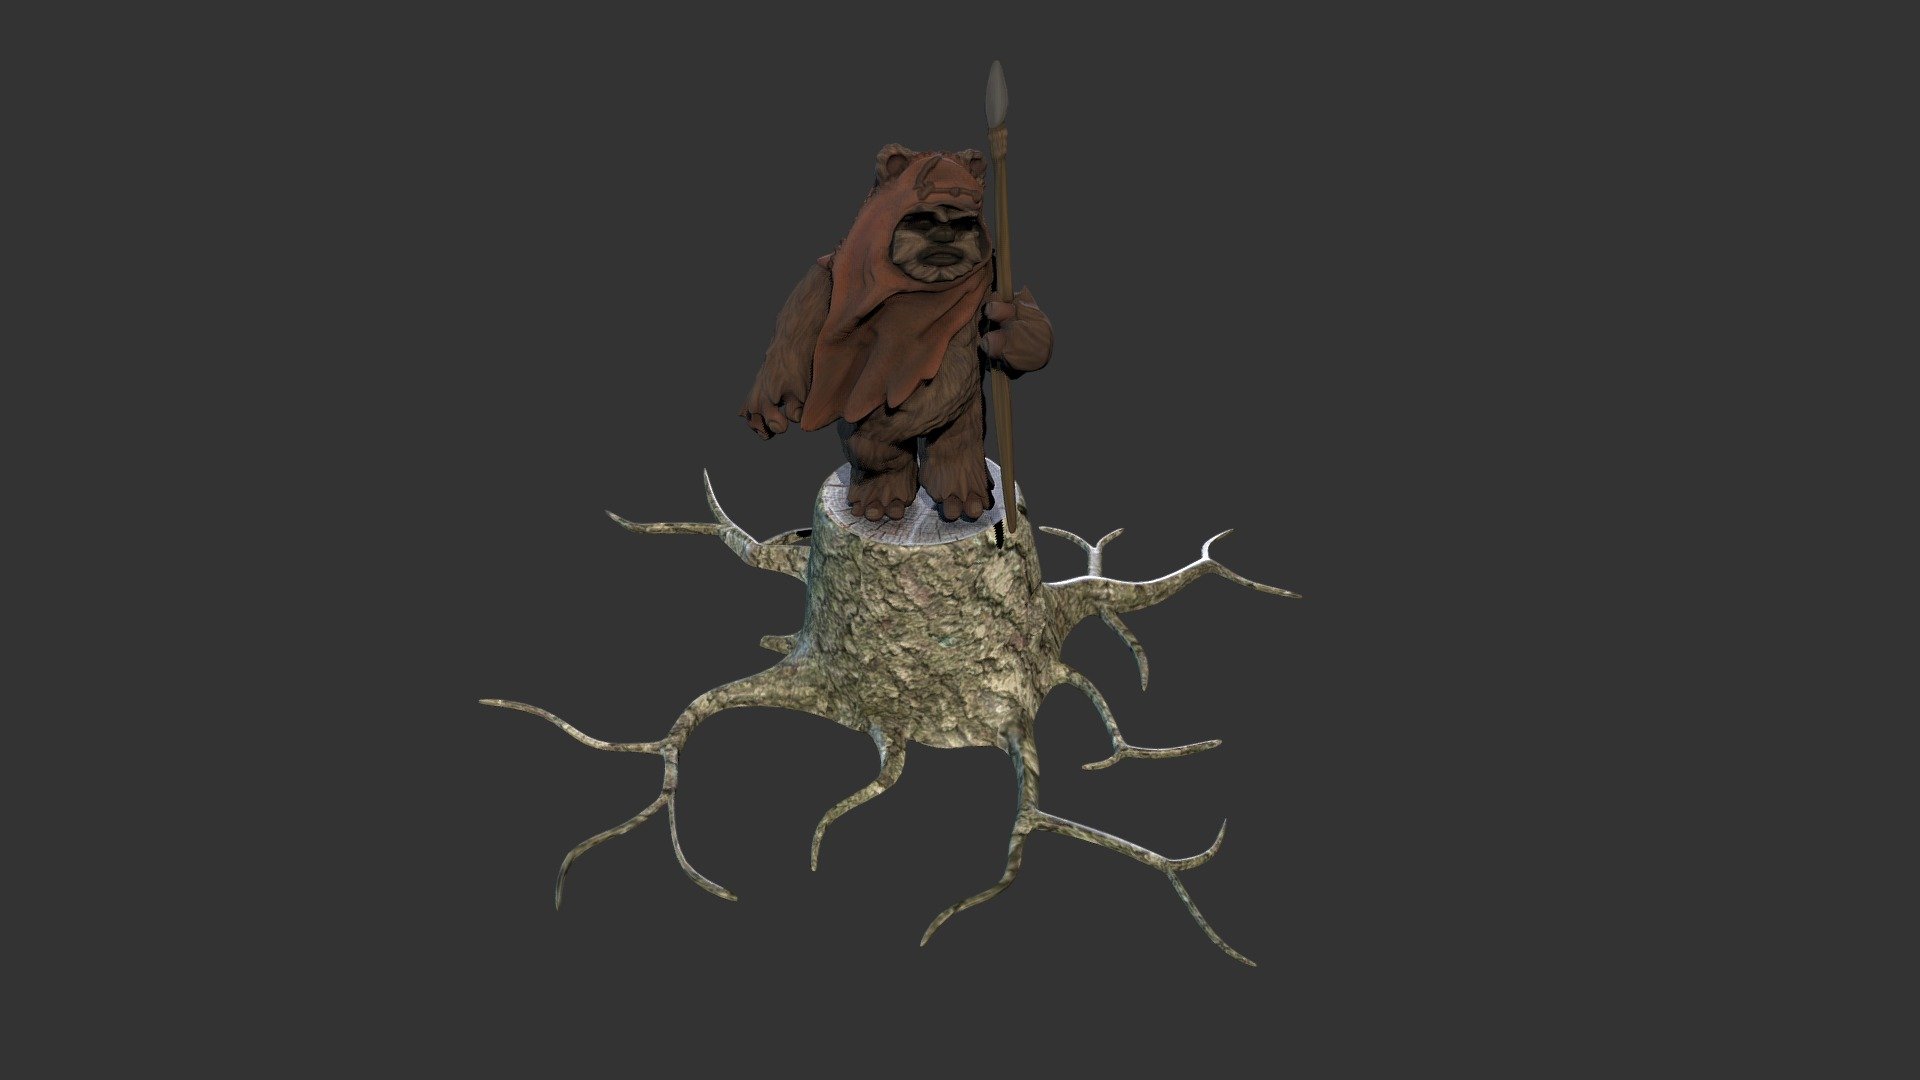 Ewoks were sentient, diminutive, furry bipeds native to the forest moon of Endor. 

This ewok is just one of the many Star Wars exhibits that can seen in the  Star Wars Virtual Museum.

Download the Star Wars Virtual Museum here:

http://www.starwarsvirtualmuseum.com - Ewok - 3D model by Mind Mulch for The Masses (@mindmulchforthemasses) 3d model